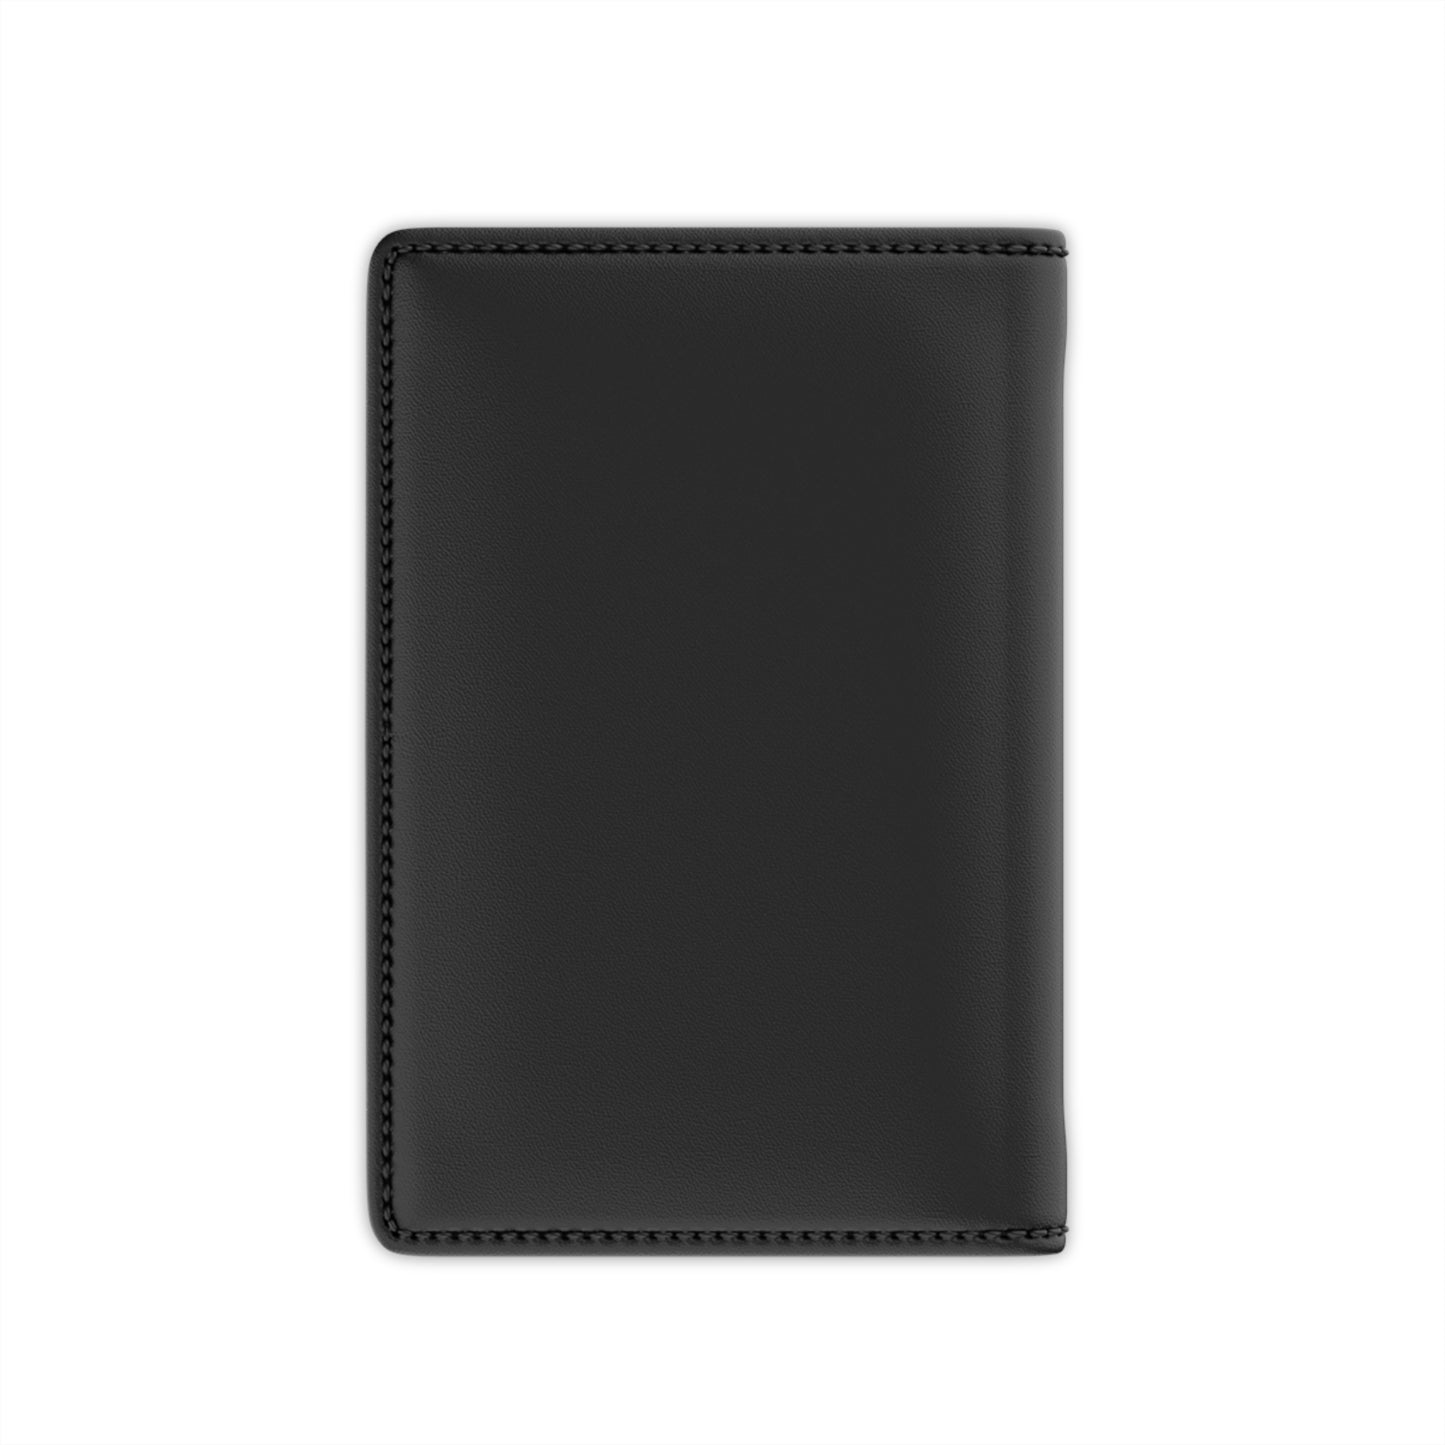 Passport Cover: BALEIJO Coiffure Collection 02